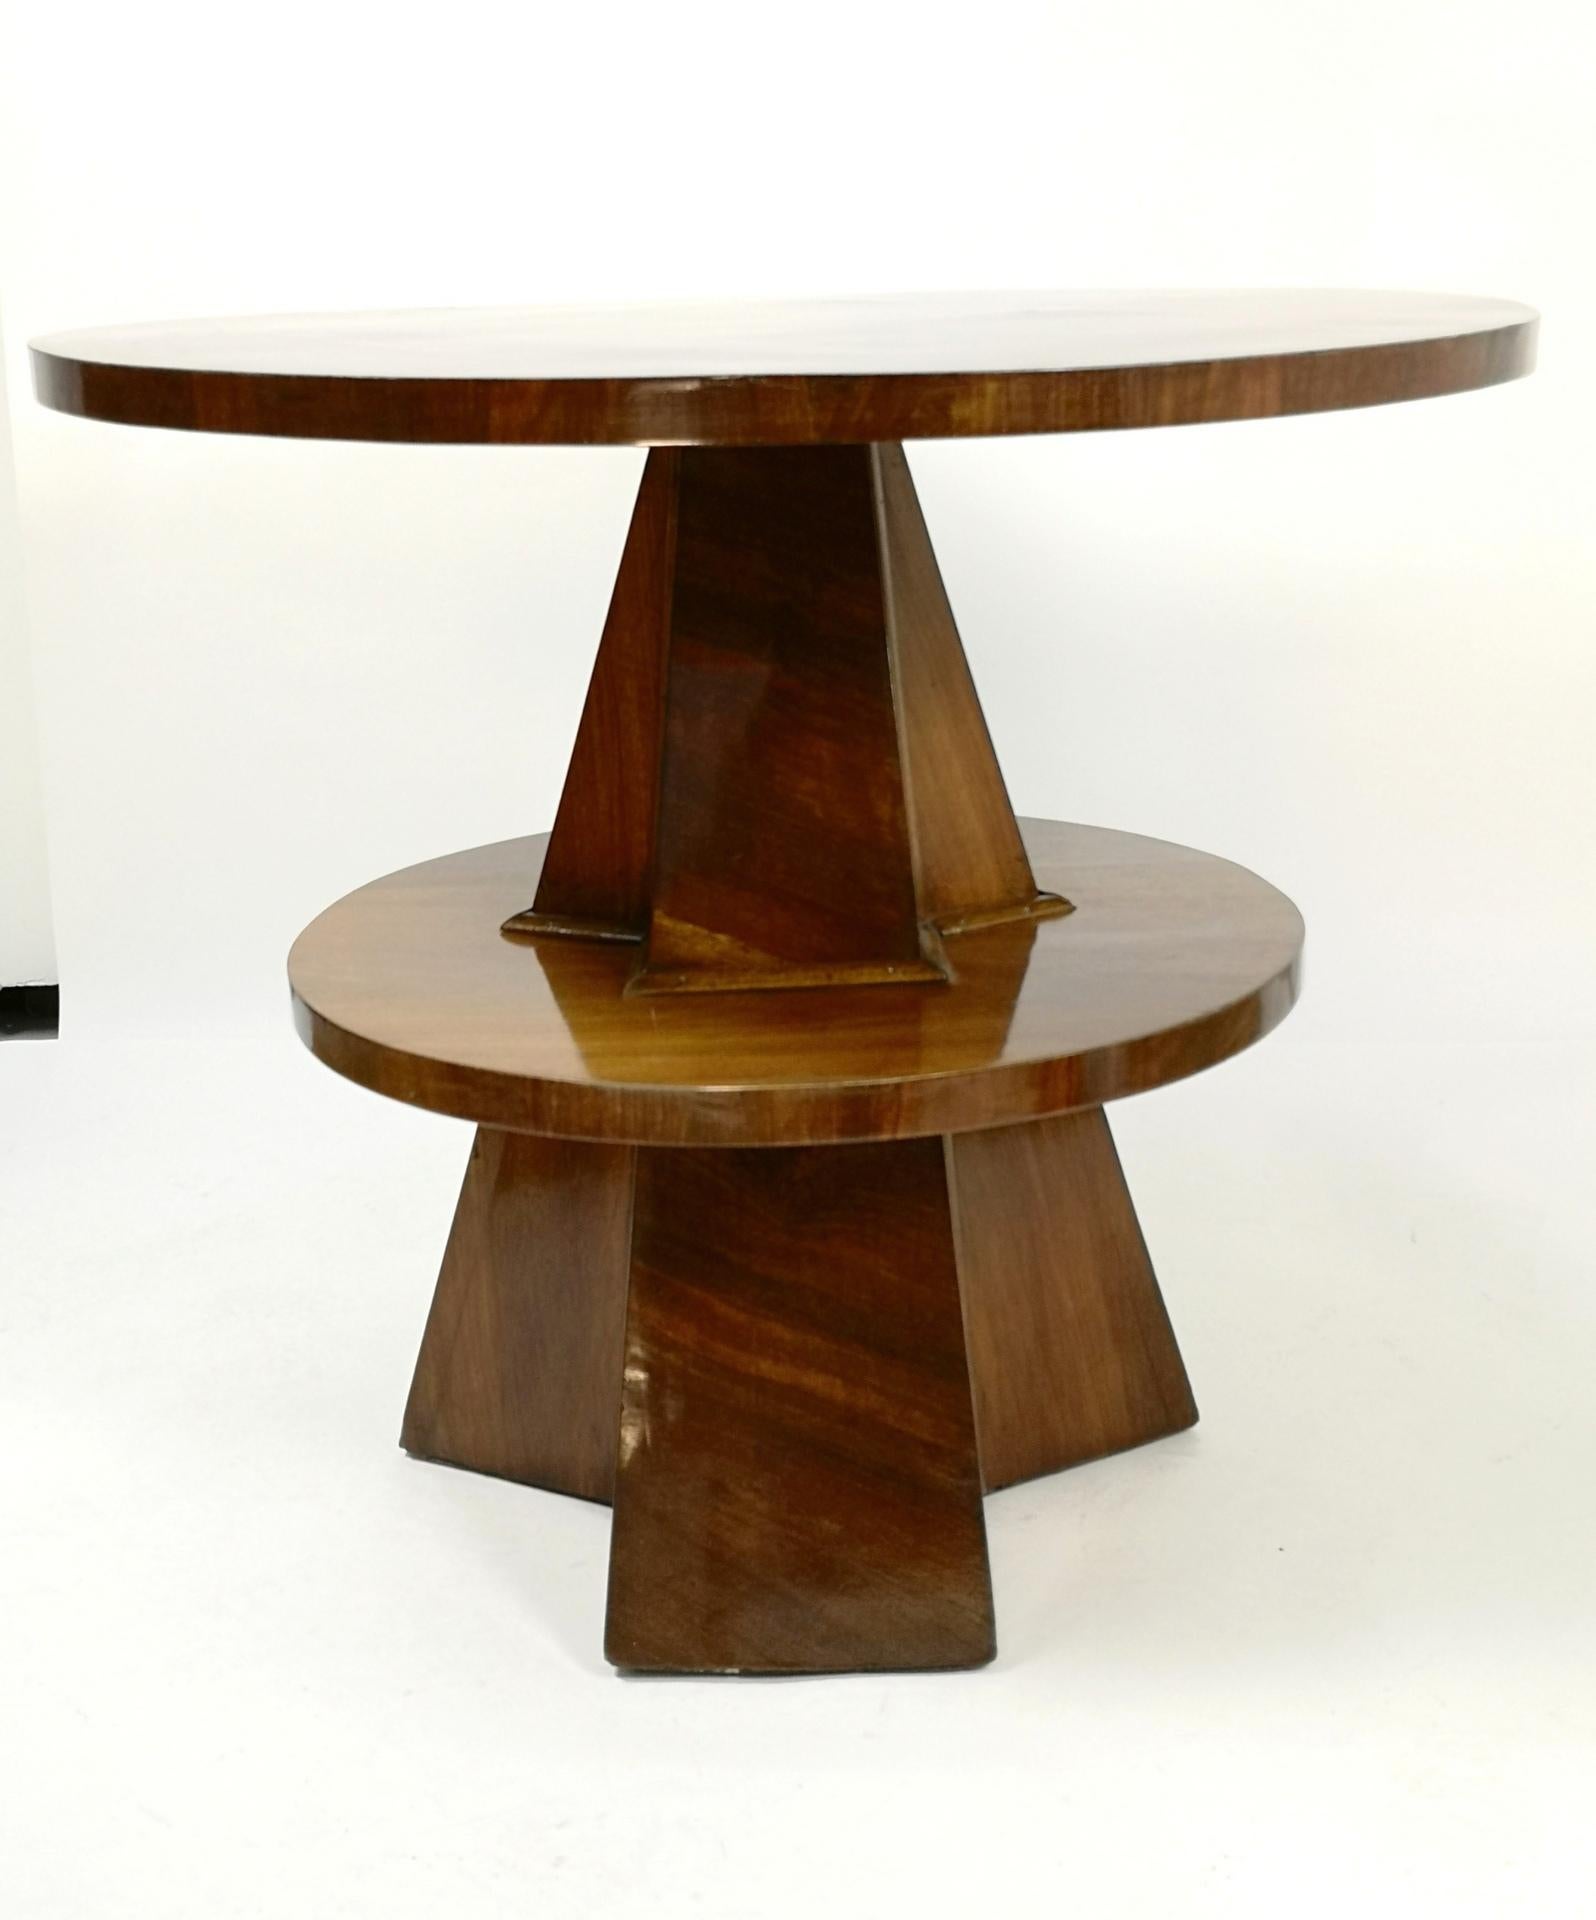 European Art Deco Saloon Table with Walnut Veneer and French Lacquer Polish, 1930's